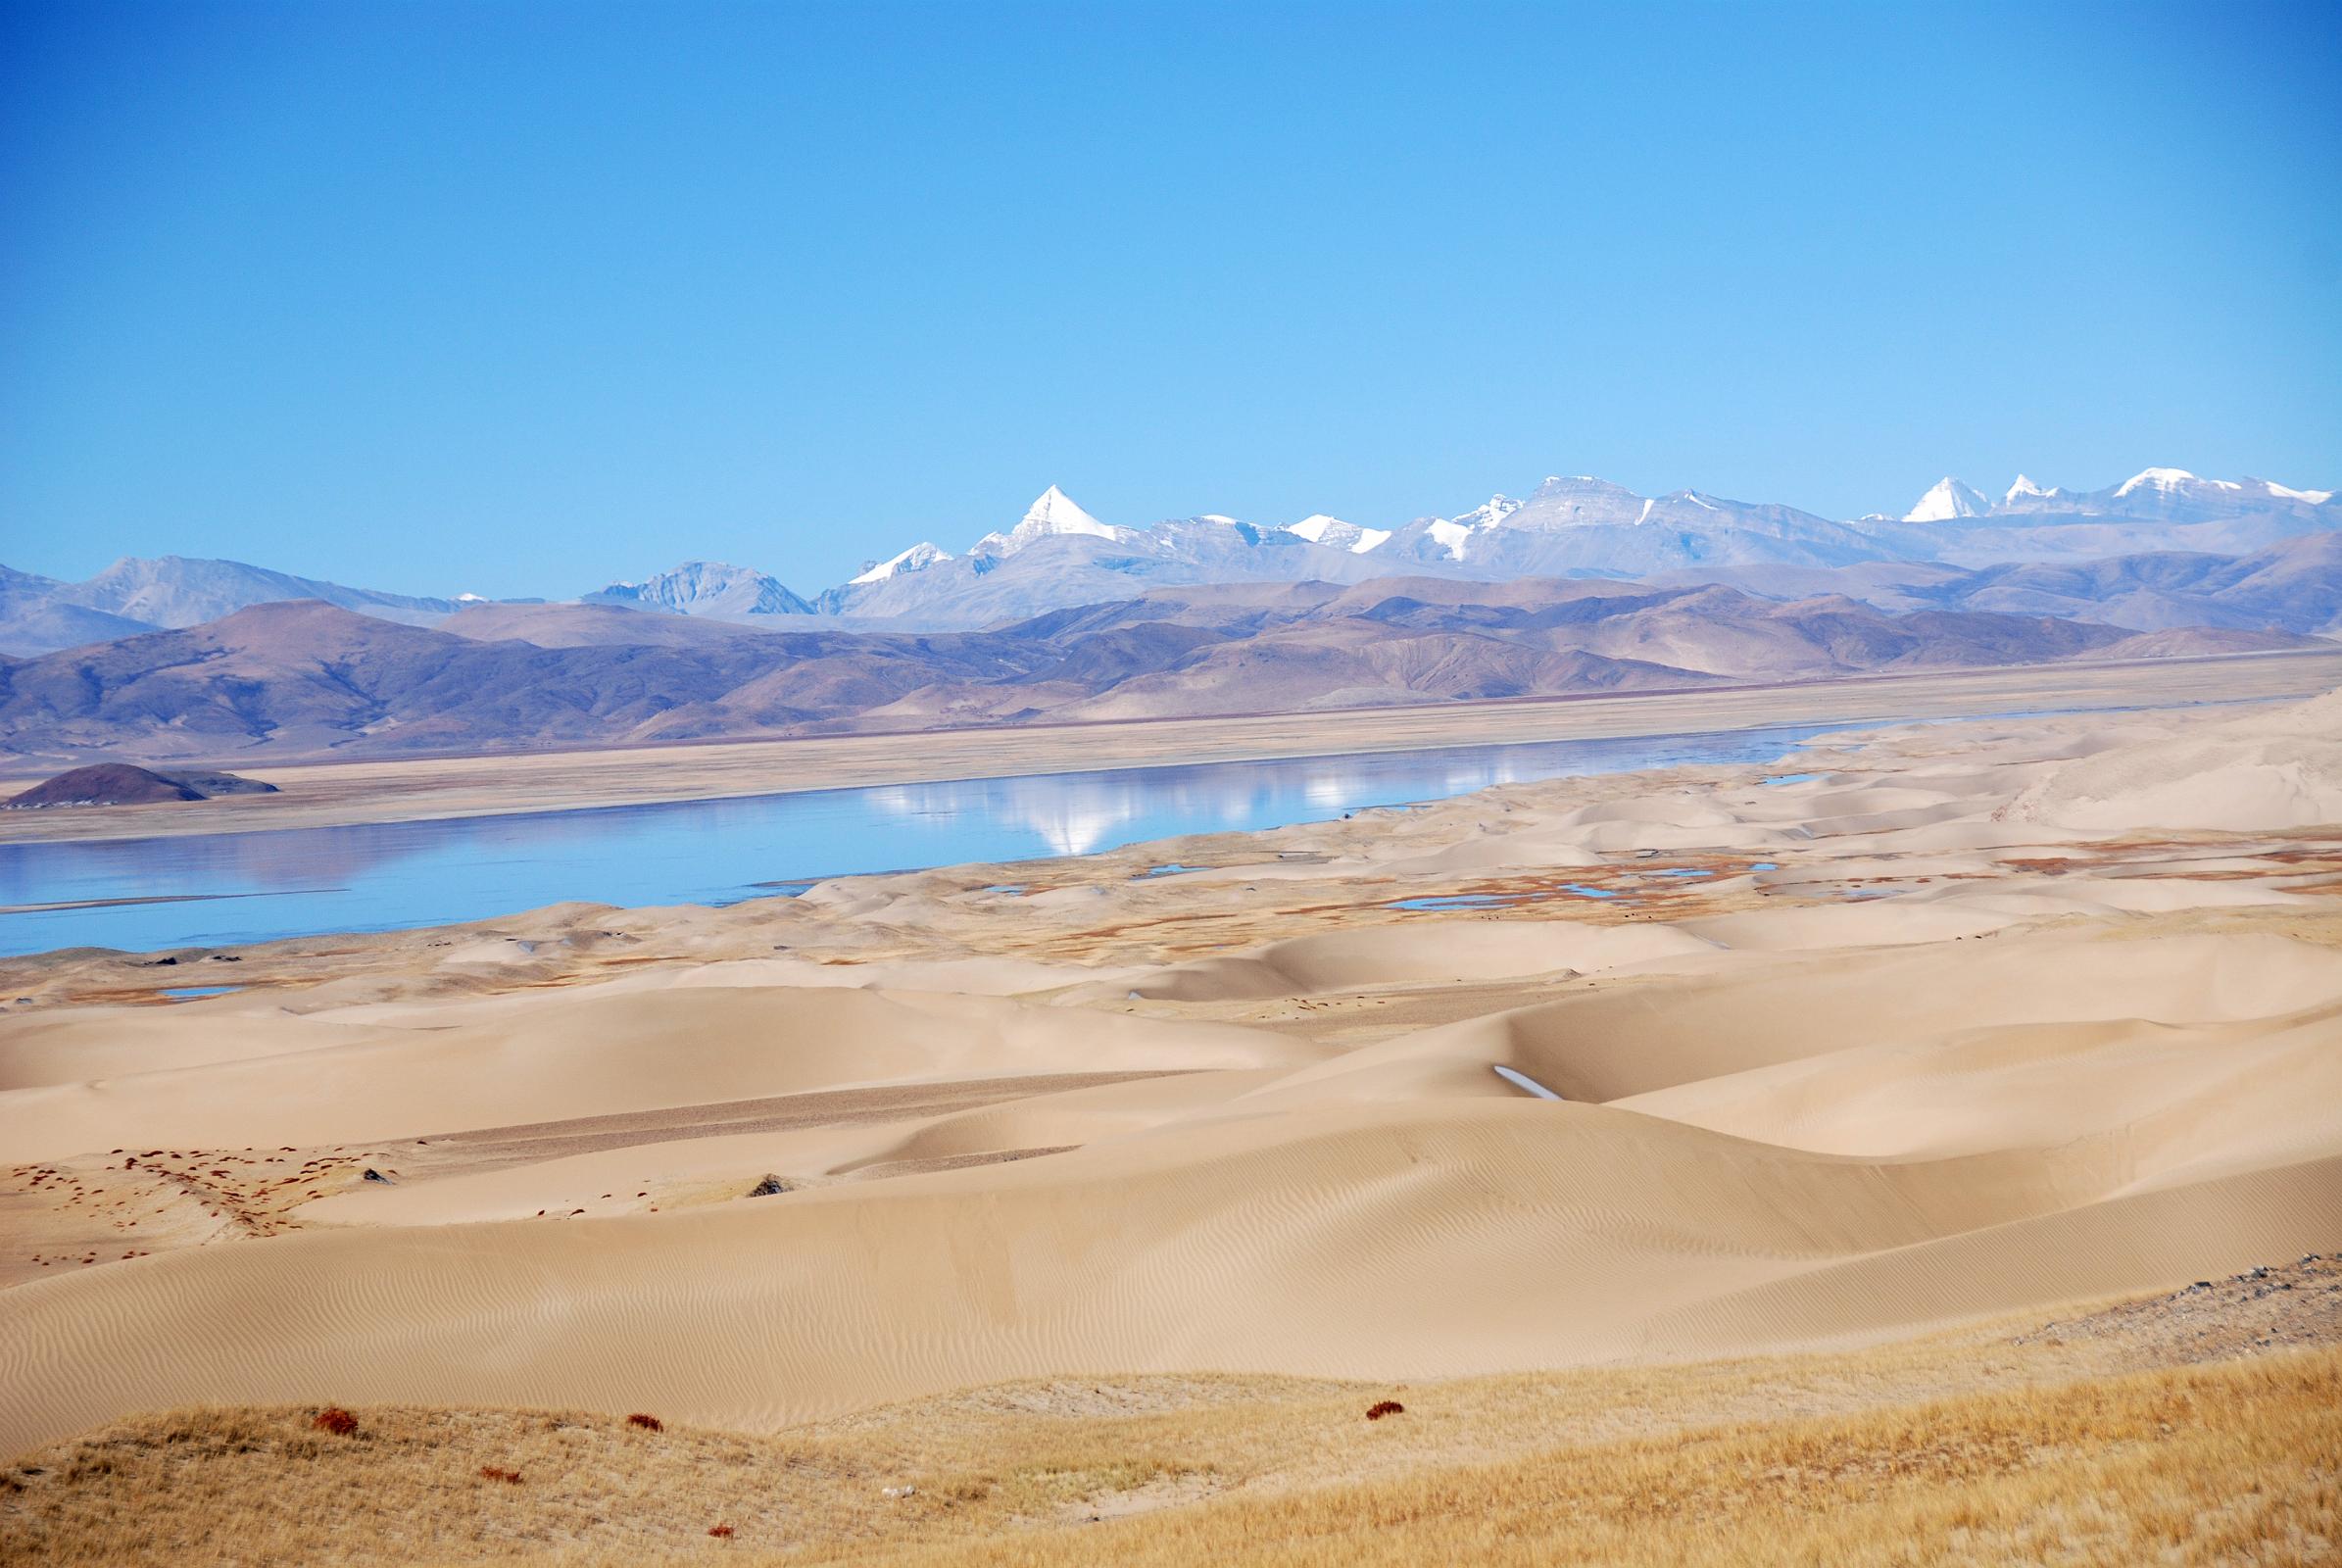 35 Sand Dunes Morning Between Old Zhongba And Paryang Tibet The mountains are reflected in the water next to the sand dunes in the morning sun on the road between Old Zhongba and Paryang Tibet.